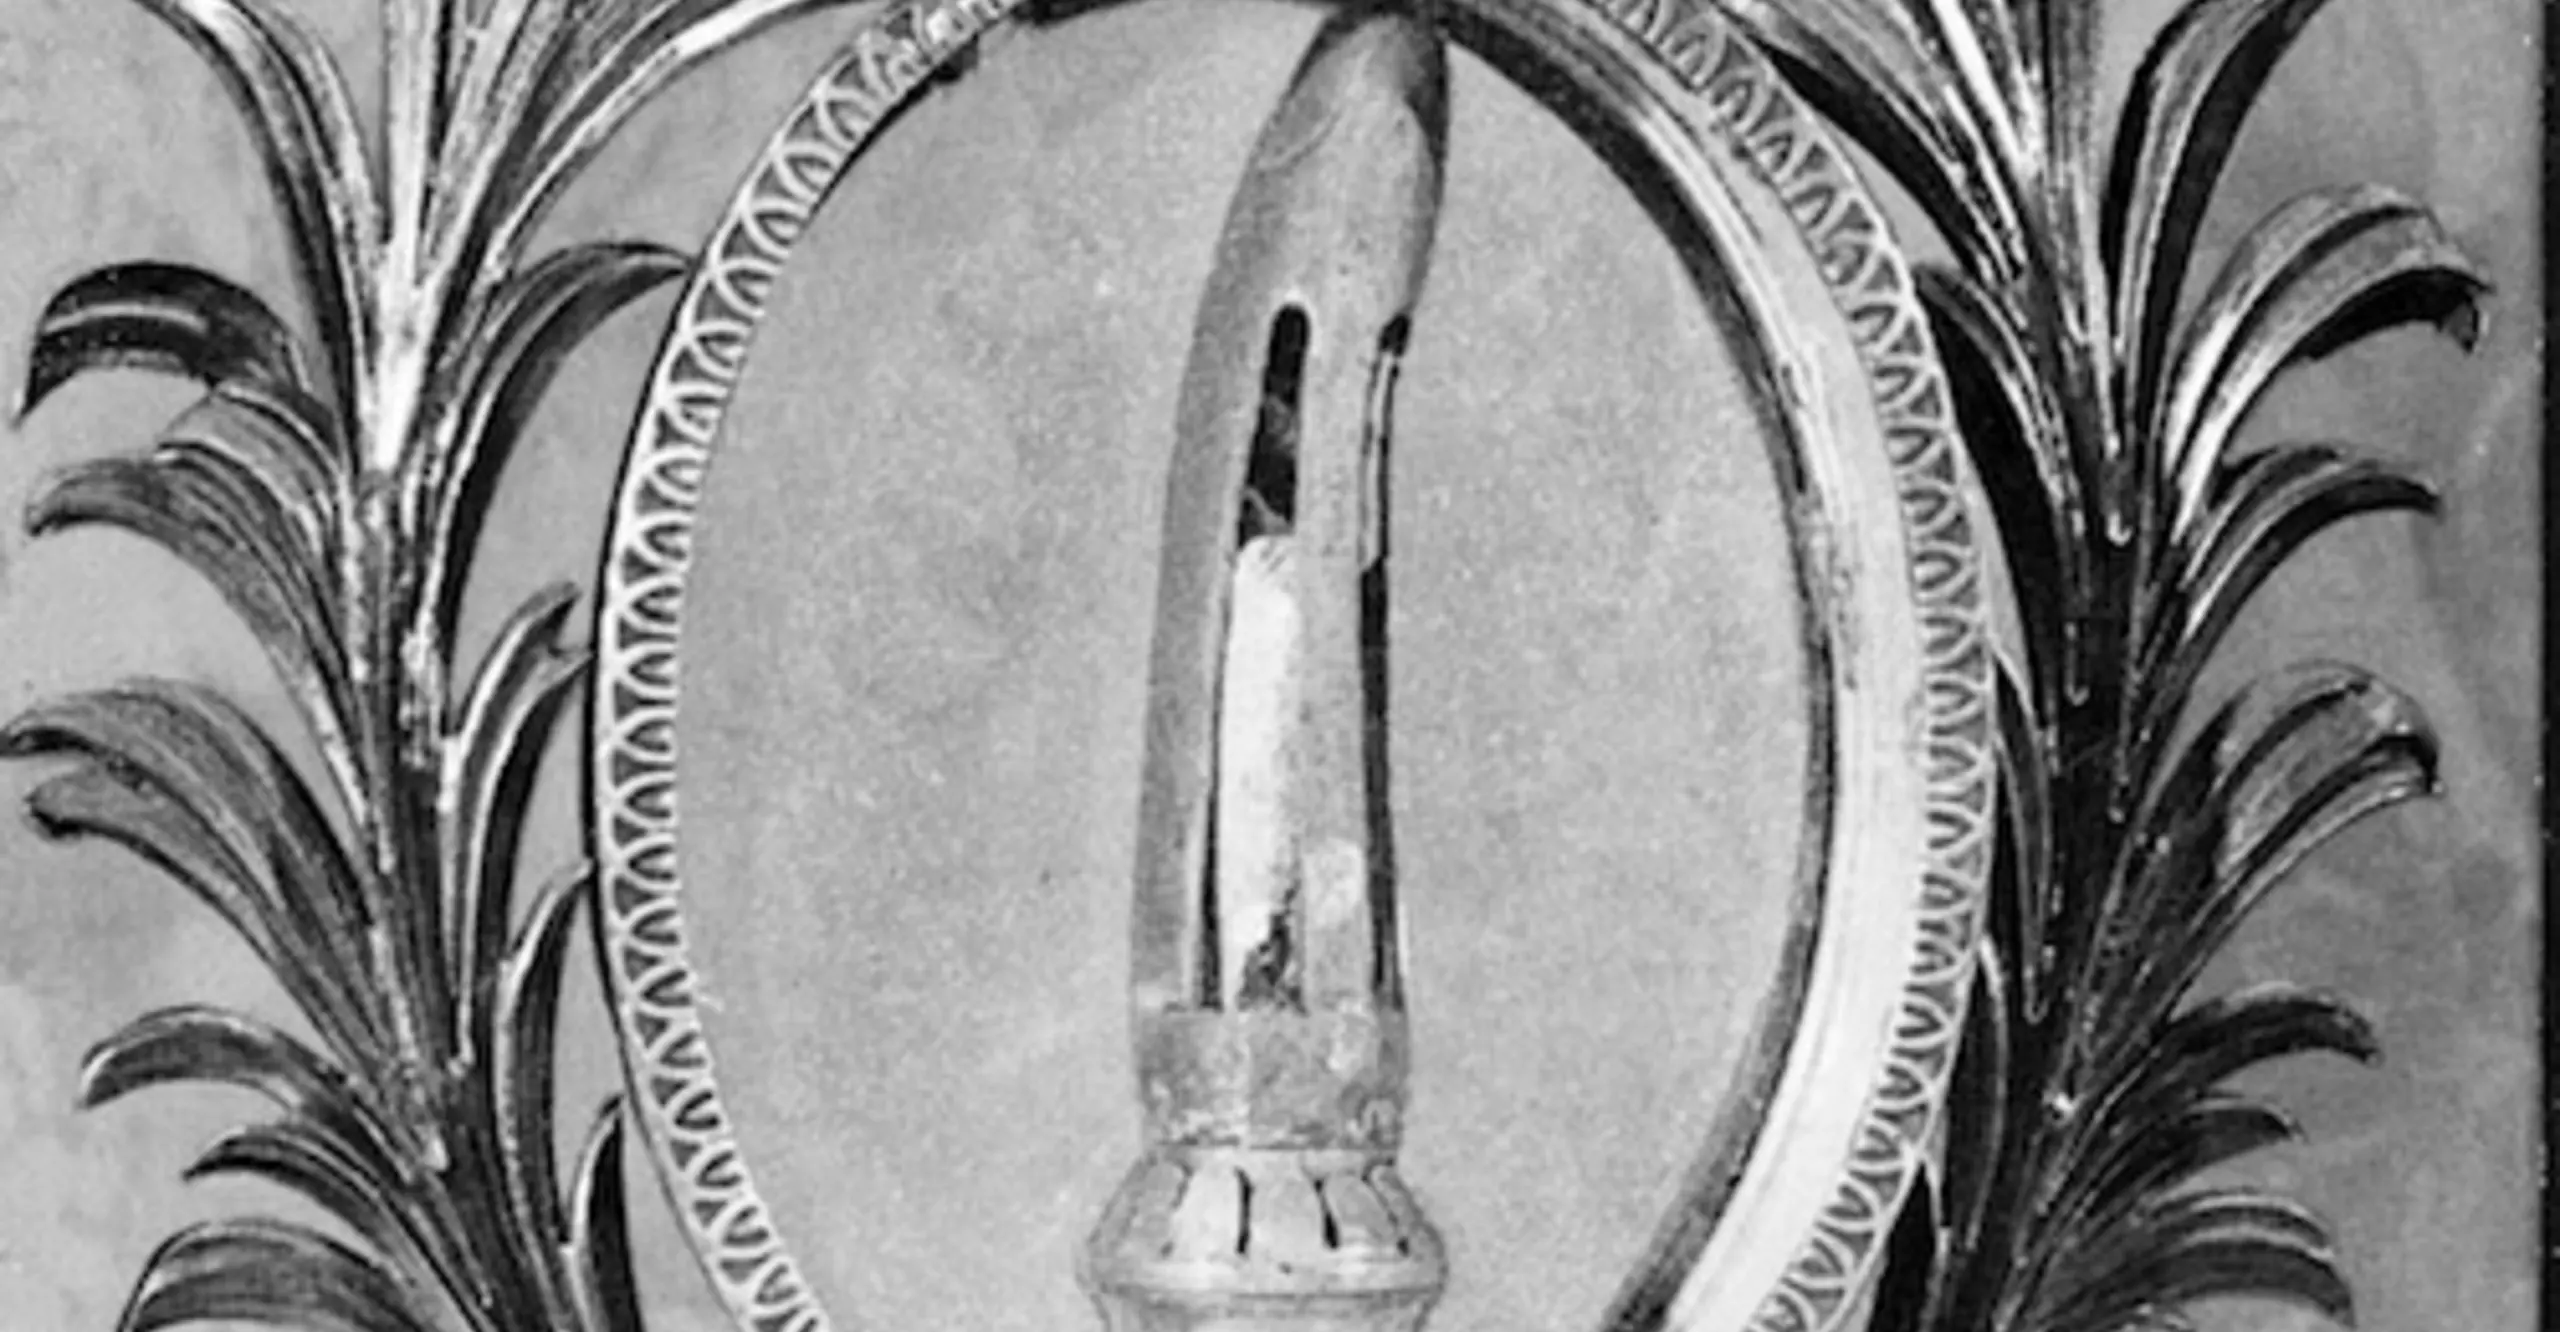 The holy finger of St. Thomas Apostle. Basilica of Santa Croce in Gerusalemme, Rome. Courtesy Glenn W. Most